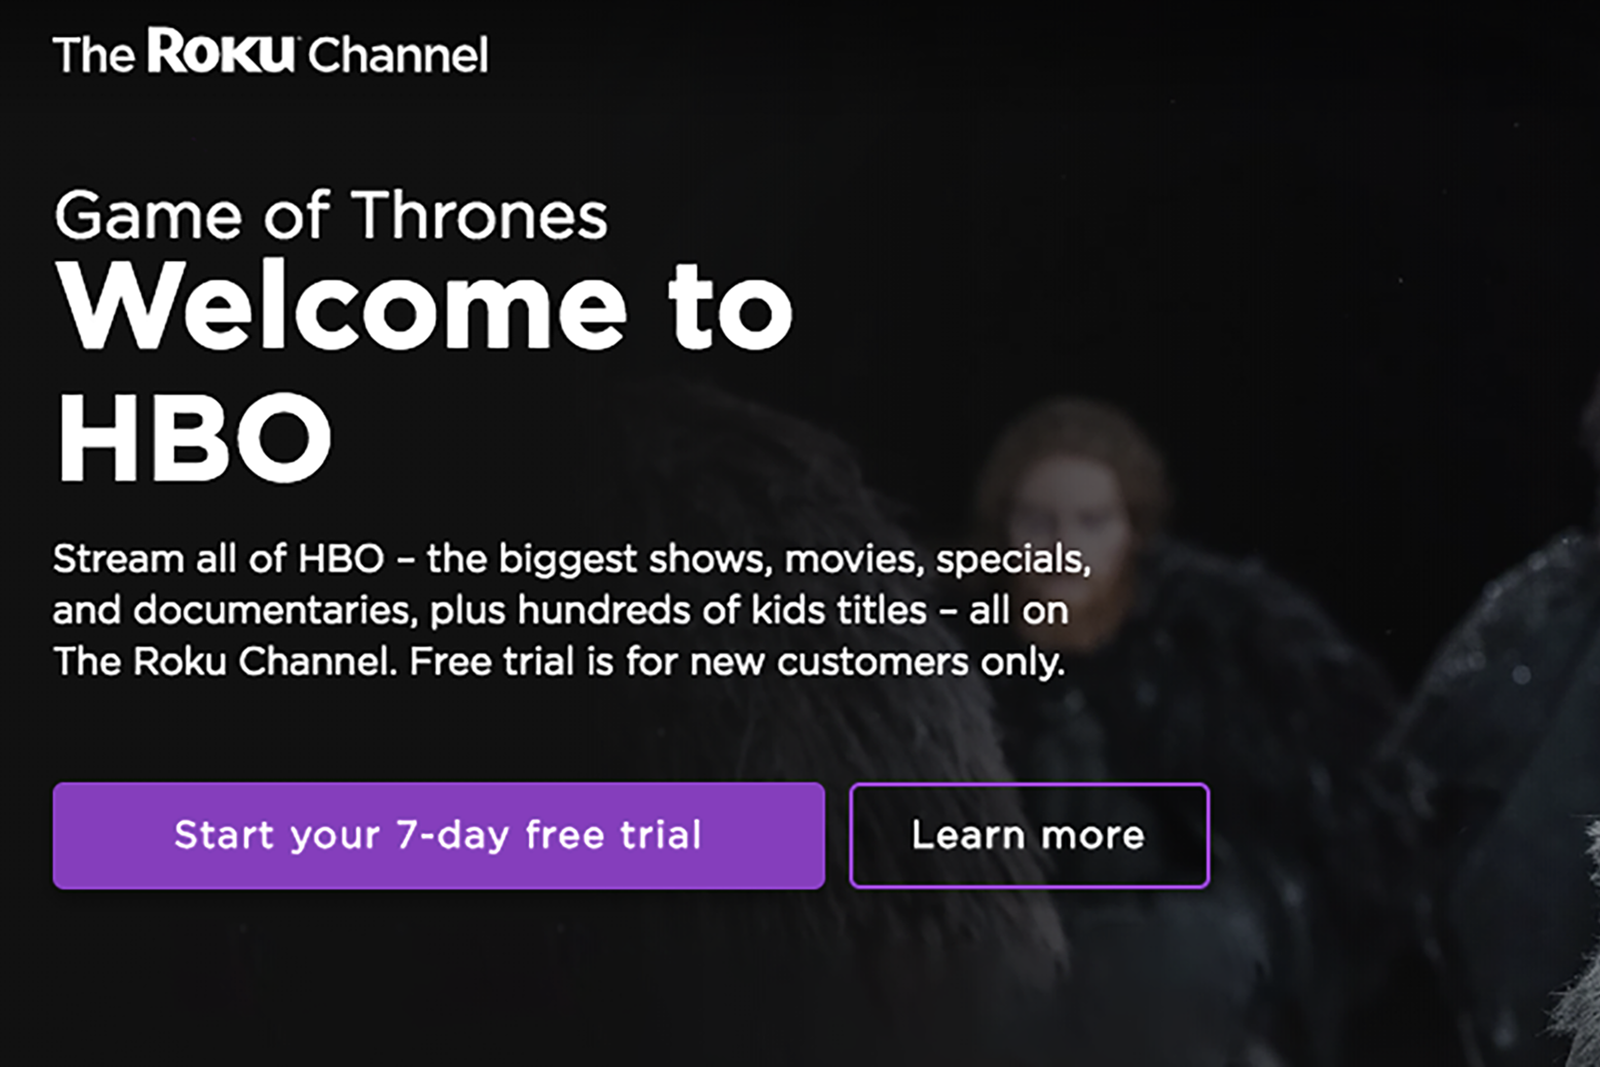 Roku Channel Adds Hbo To Its Premium Channel Lineup Just In Time For Got image 2